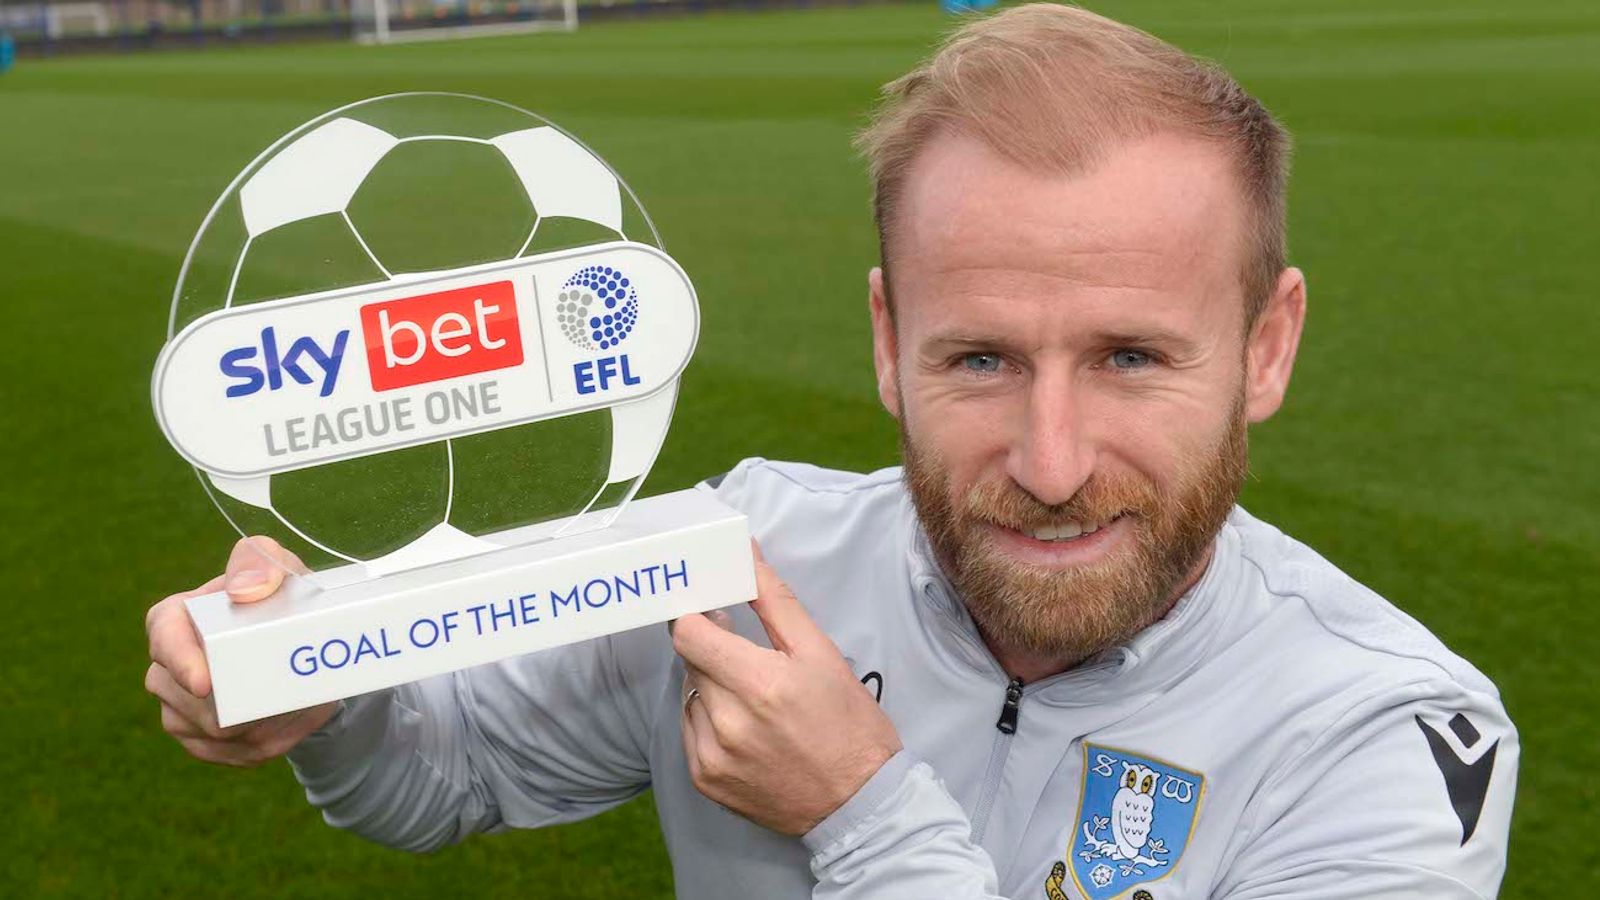 Barry Bannan interview: Sheffield Wednesday captain on creativity, ditching alco..